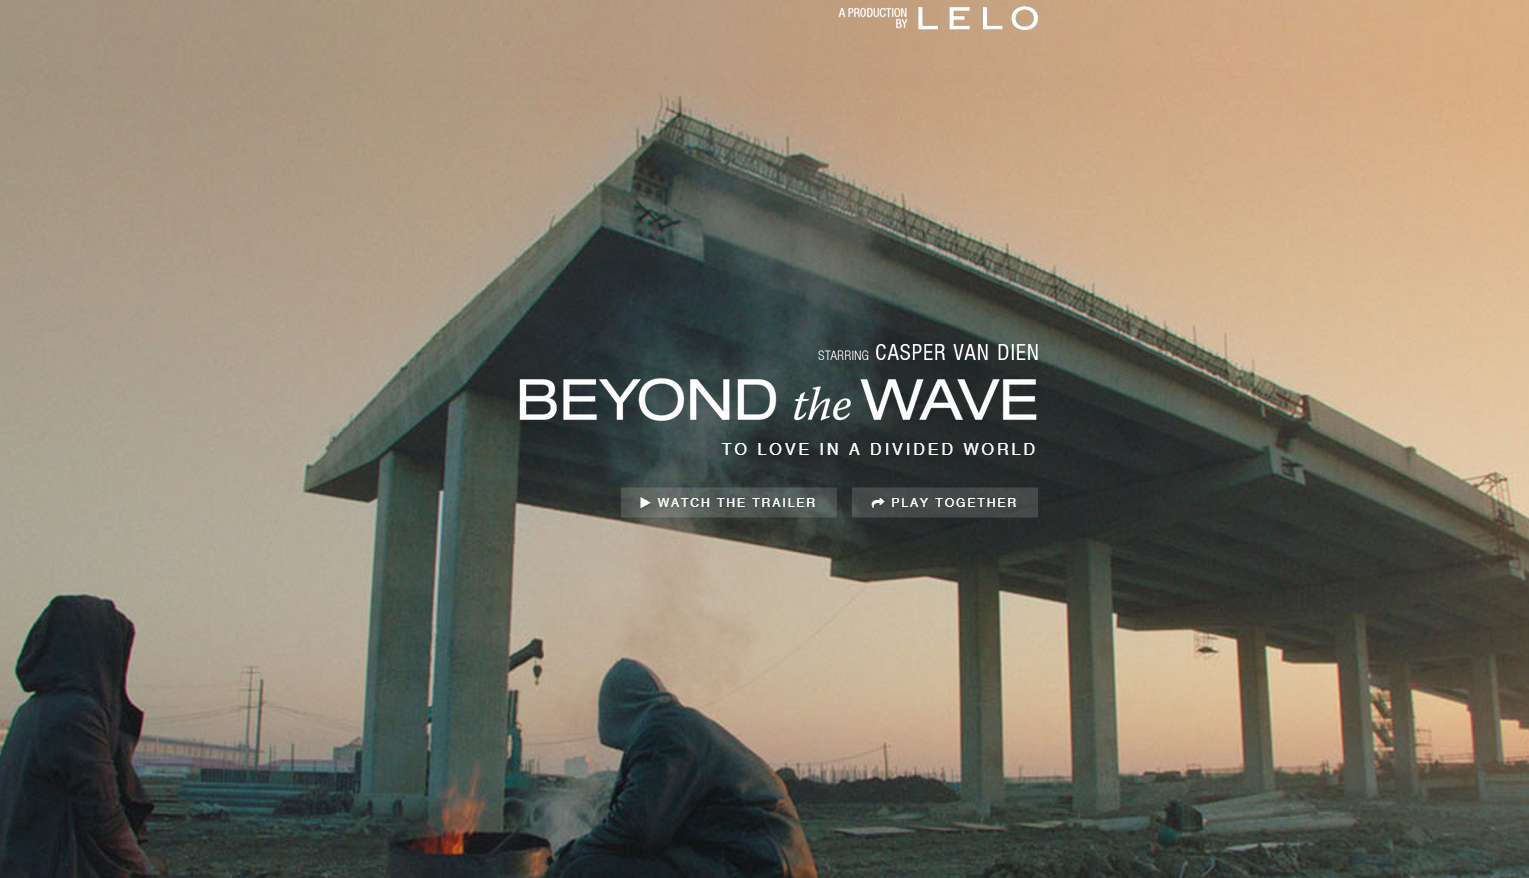 beyond the wave by lelo